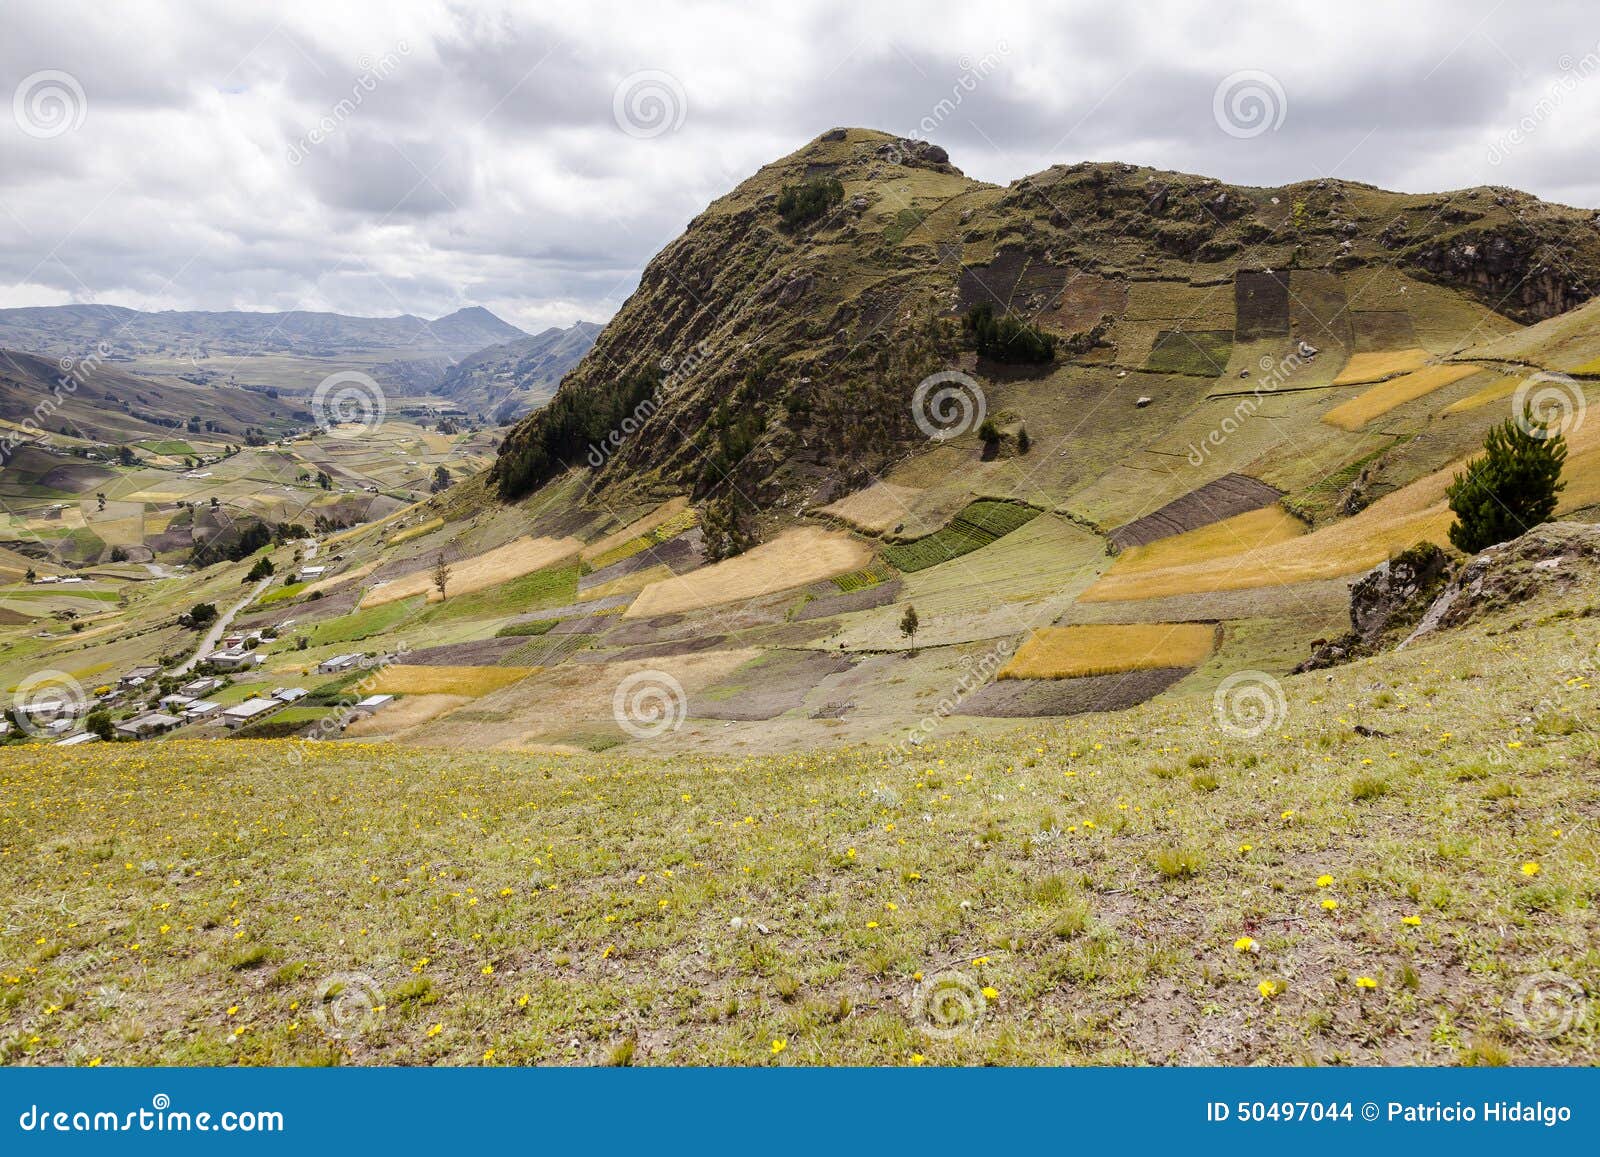 farms and crops on slopes near zumbahua